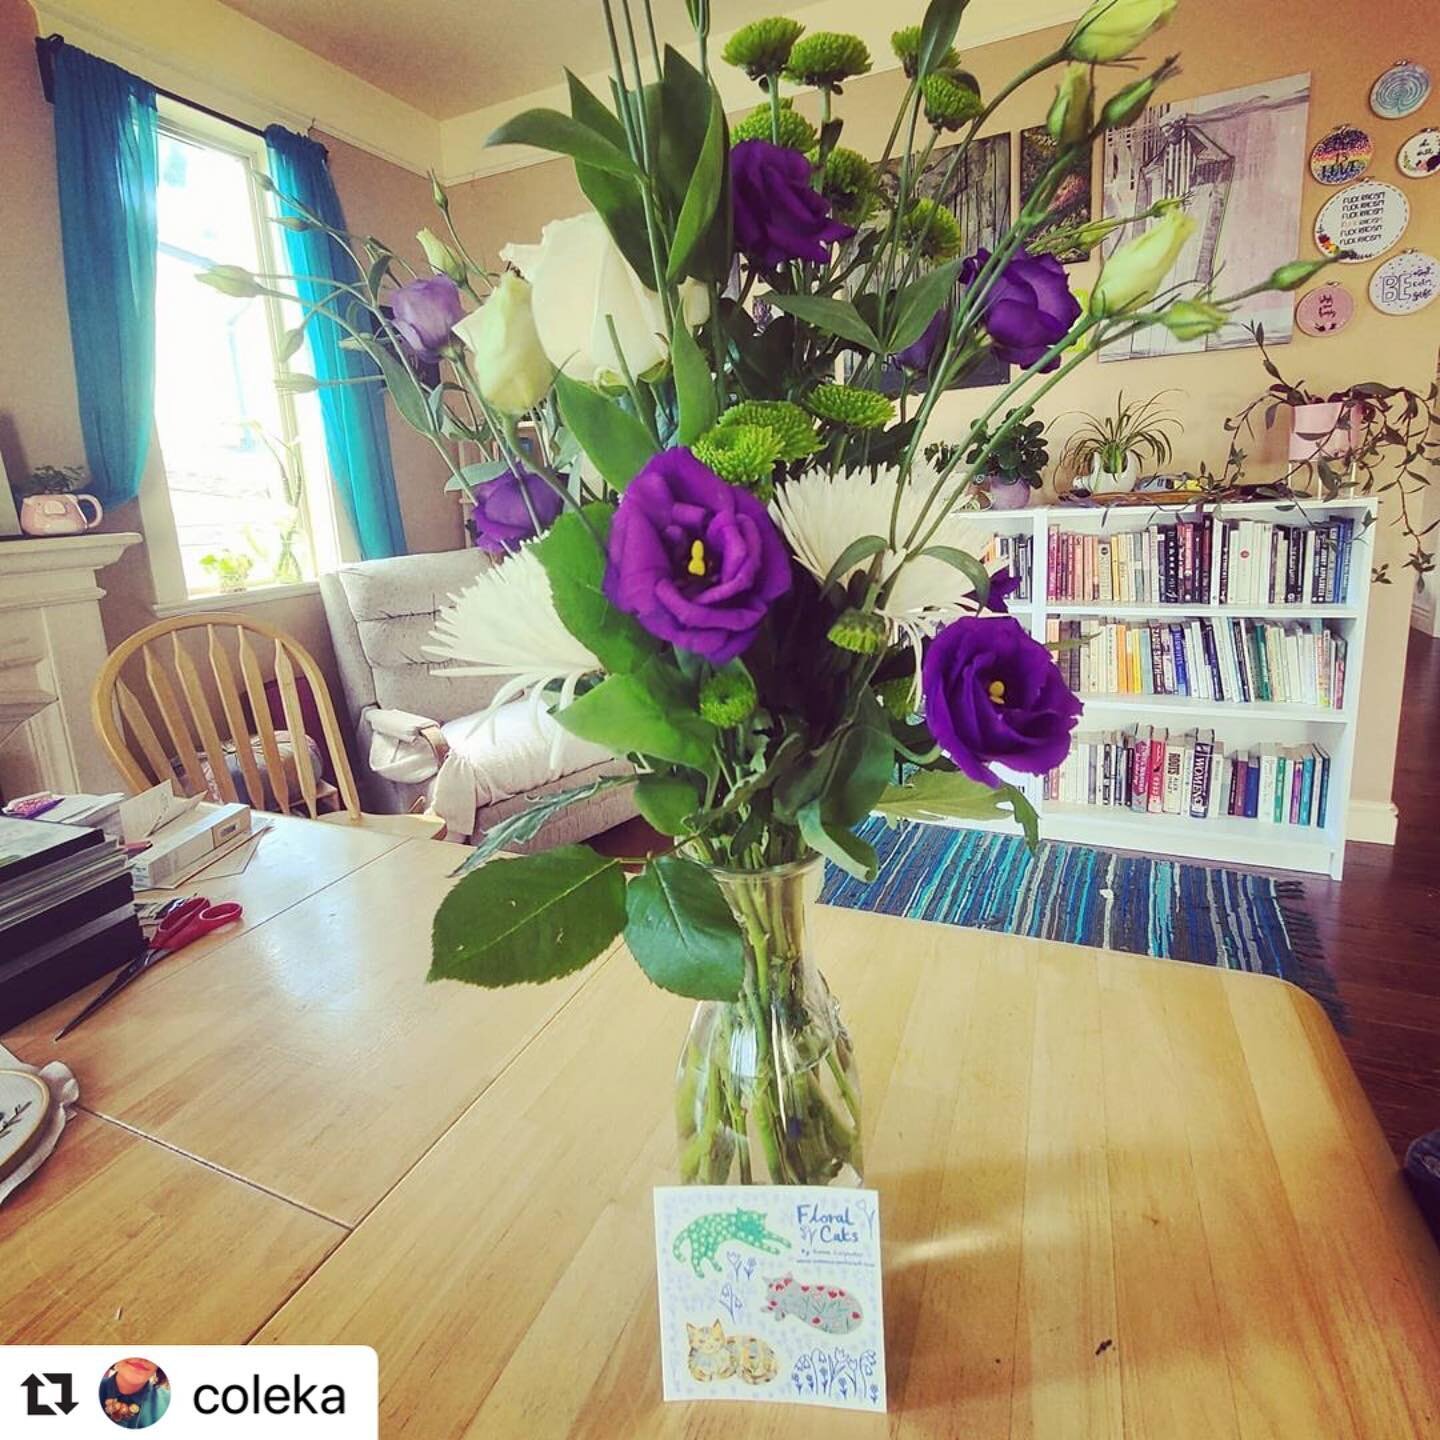 I spy the floral cat stickers by @emmacarpenterillo 😺 #Repost @coleka with @make_repost
・・・
That feeling when your cat sticker and flower subscriptions come on the same day. 😻💐
@cat_sticker_club @bears_blooms #bestofbearsblooms #catstickers